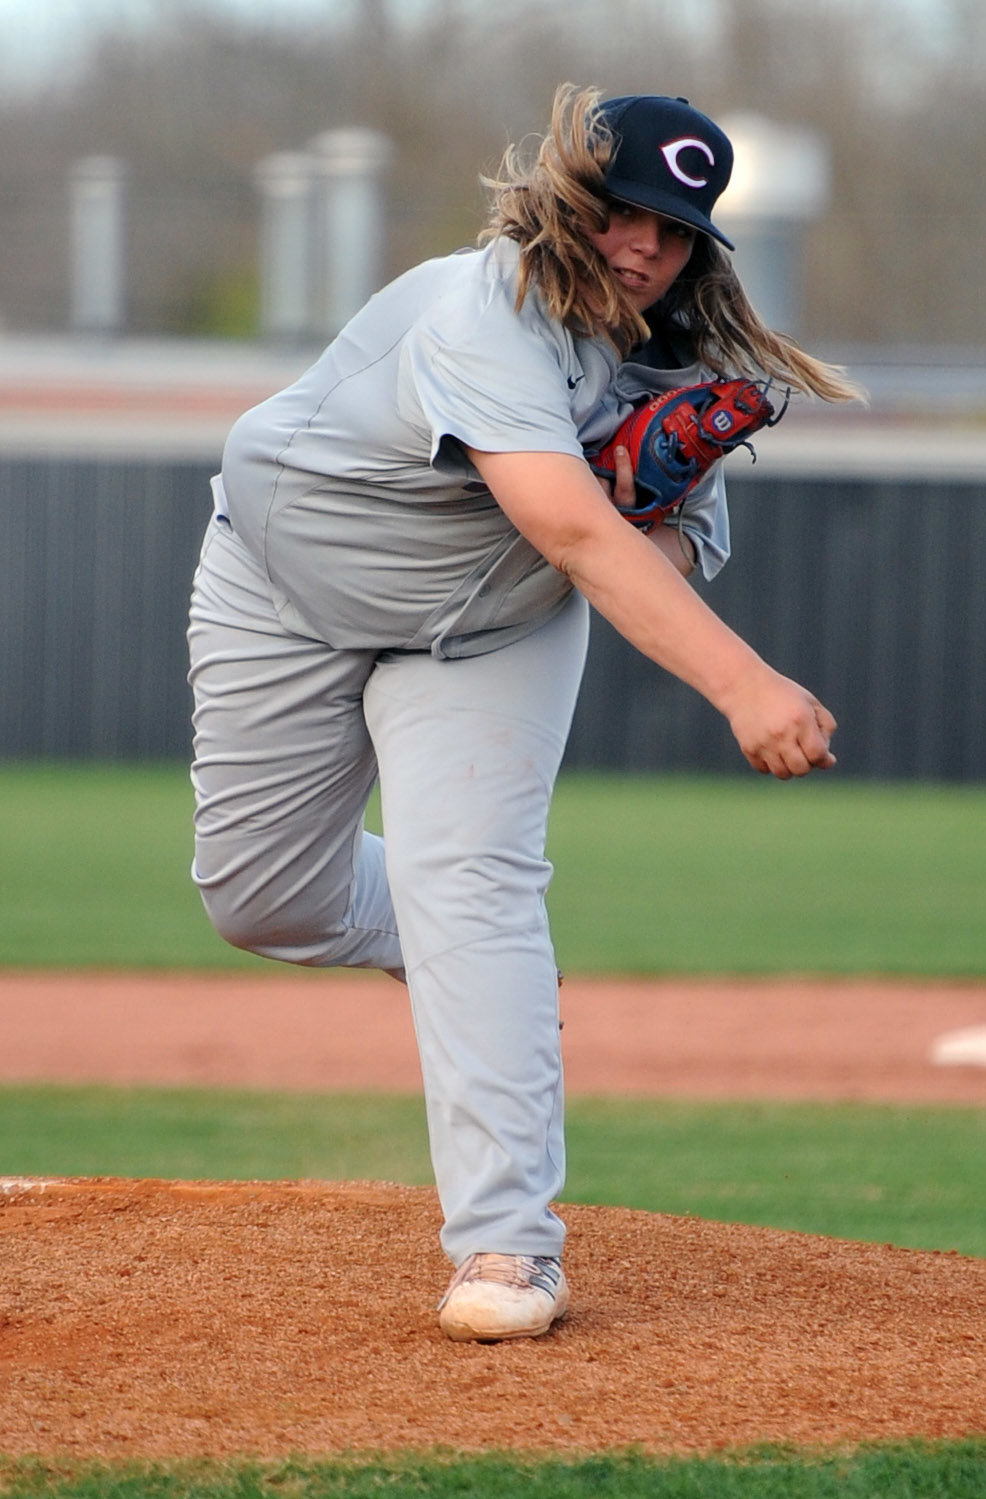 Peyton Cherry worked 2 2/3 innings in relief after entering the game in the second inning against Cascade on Monday.